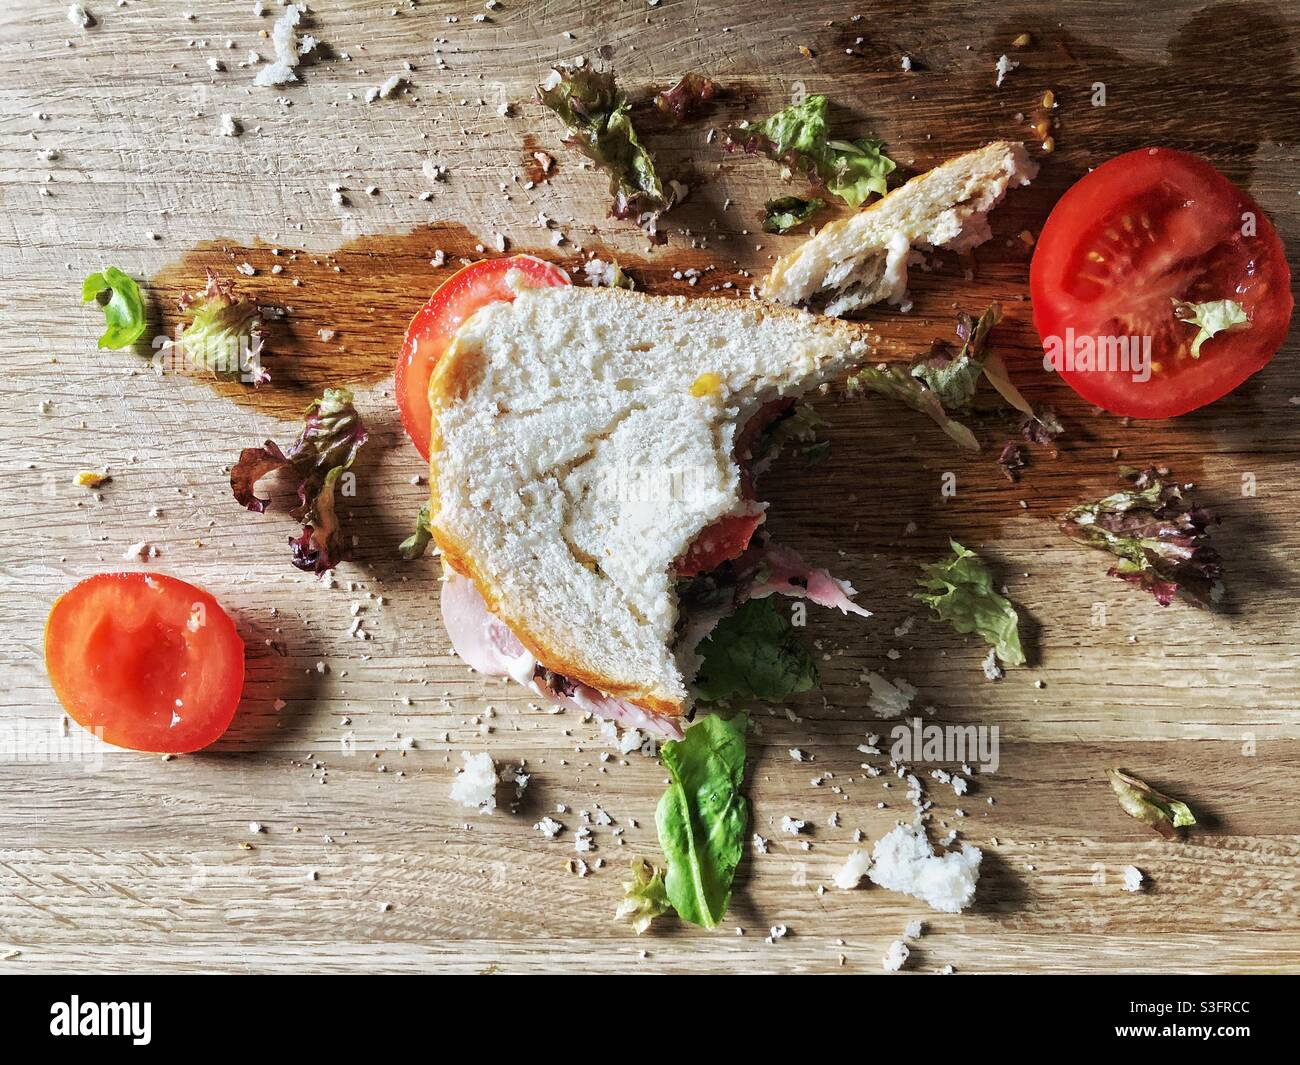 The remains of a half eaten sandwich and messy plate of food Stock Photo